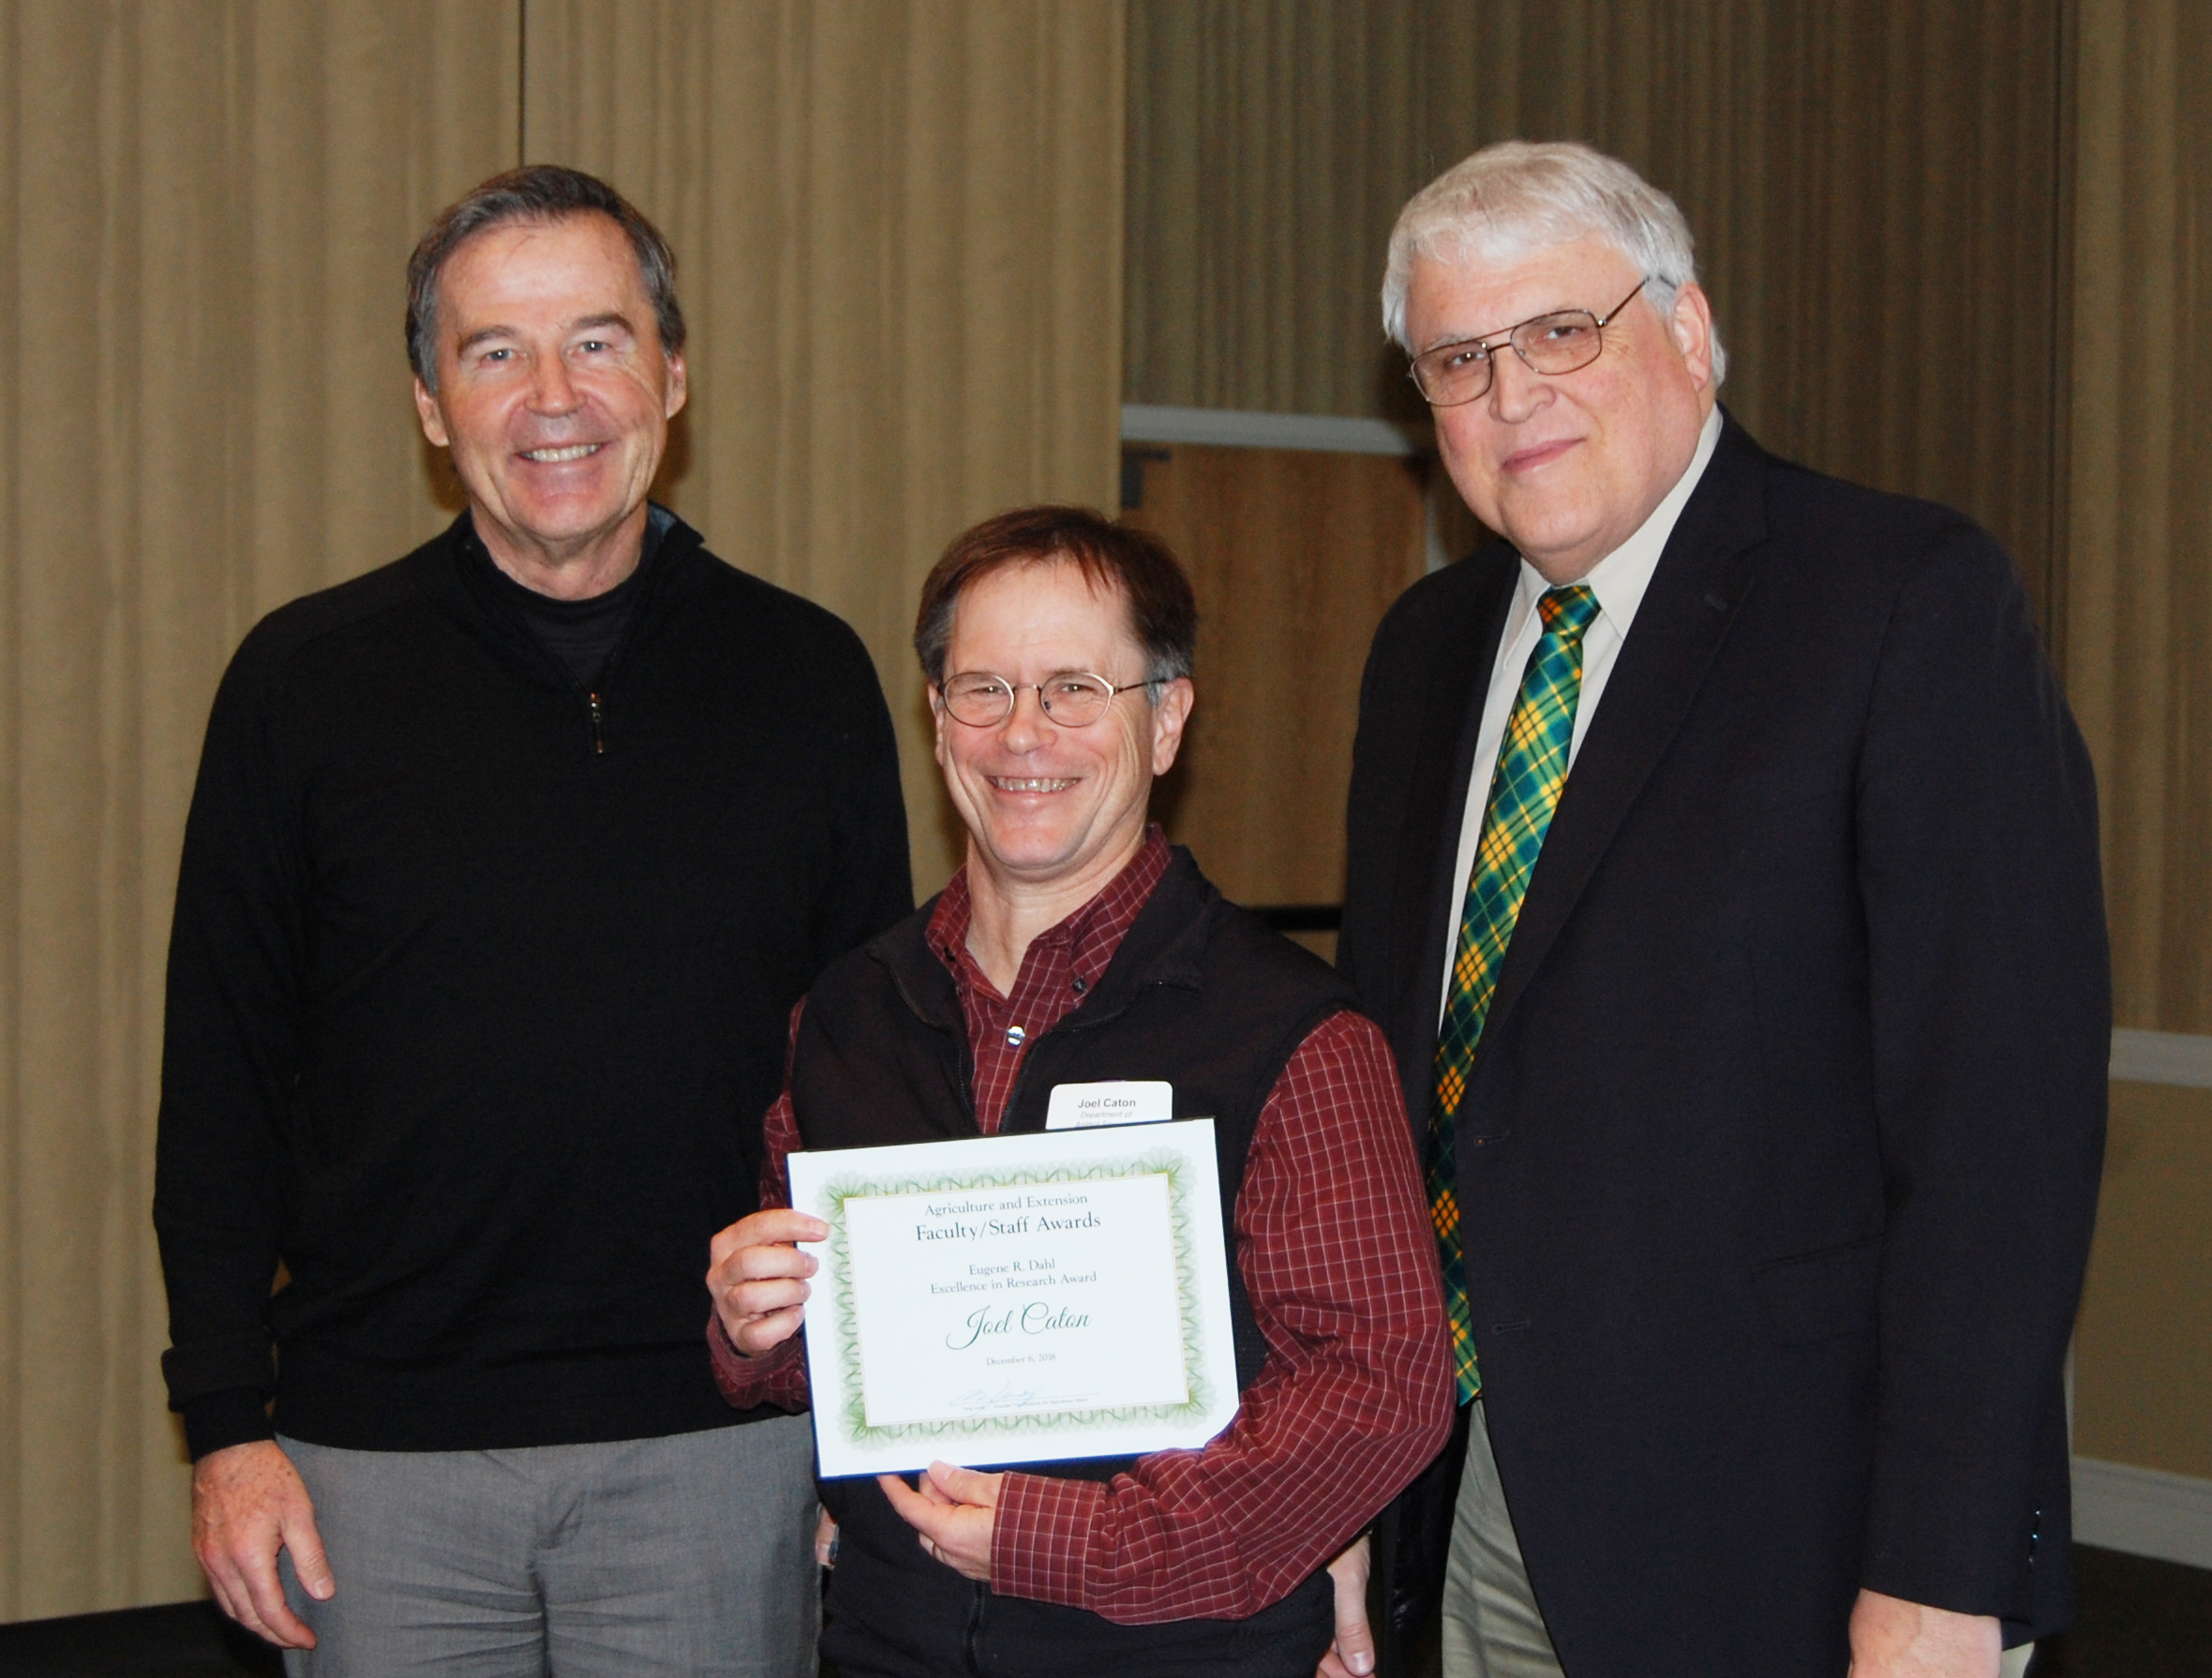 Joel Caton, center, receives the Eugene R. Dahl Excellence in Research Award from Howard Dahl, left, and David Buchanan, associate dean for academic programs. (NDSU photo)